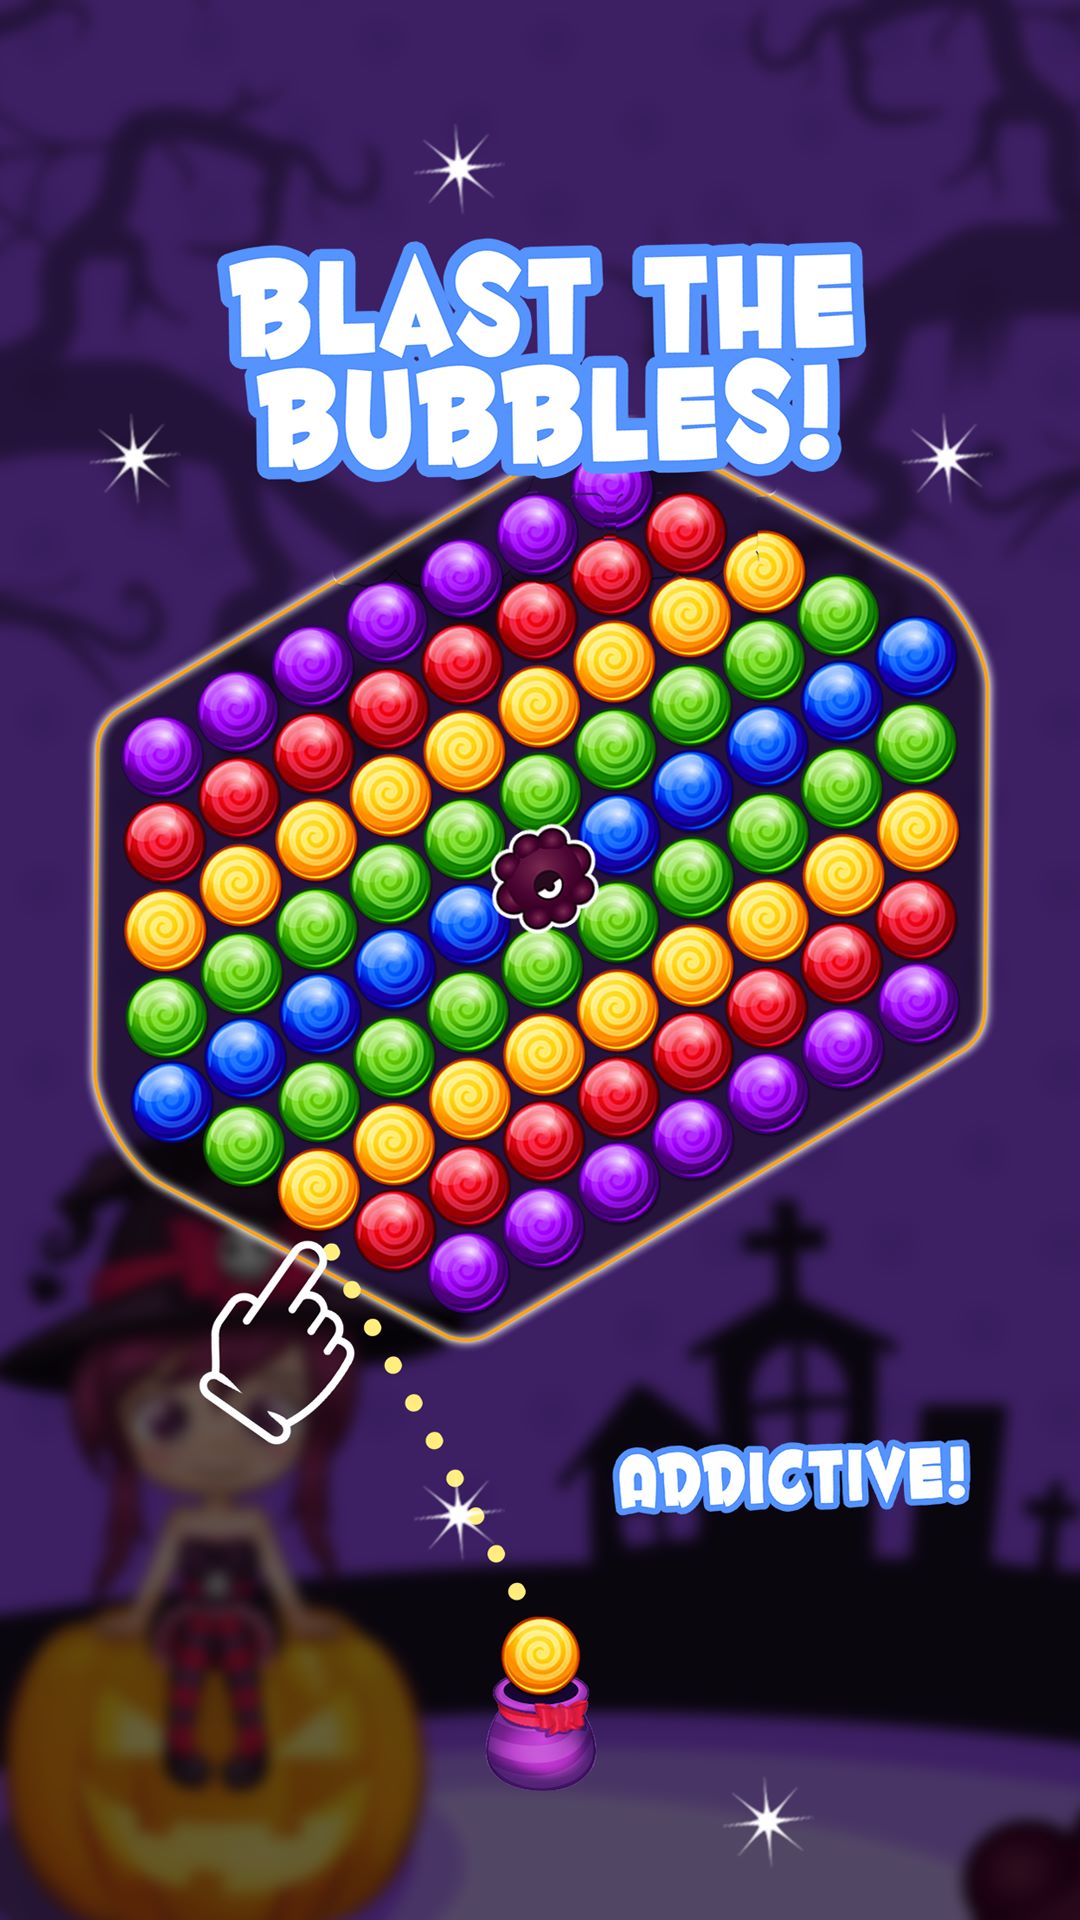 Power Pop Bubble Shooter::Appstore for Android